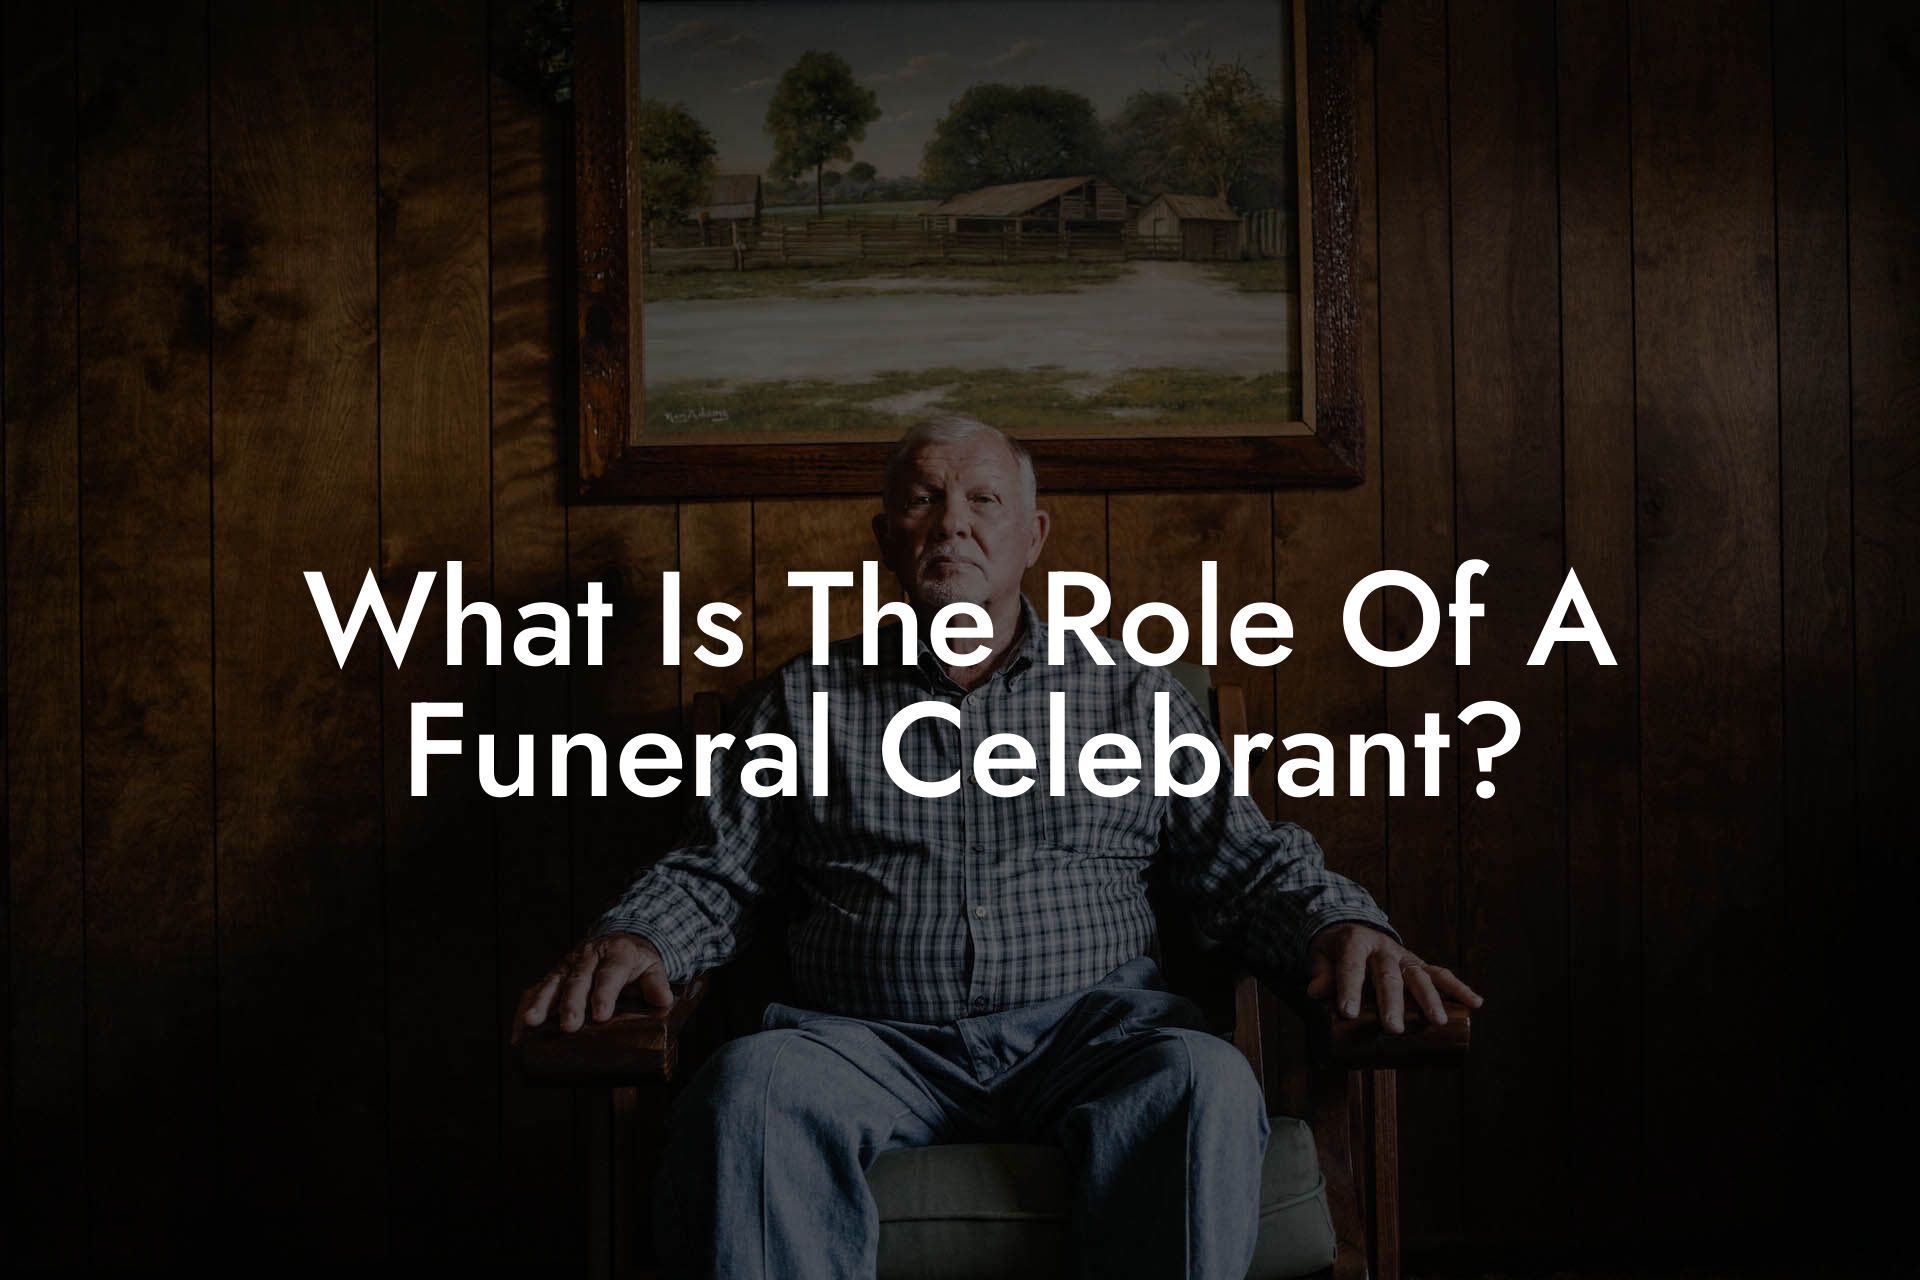 What Is The Role Of A Funeral Celebrant?